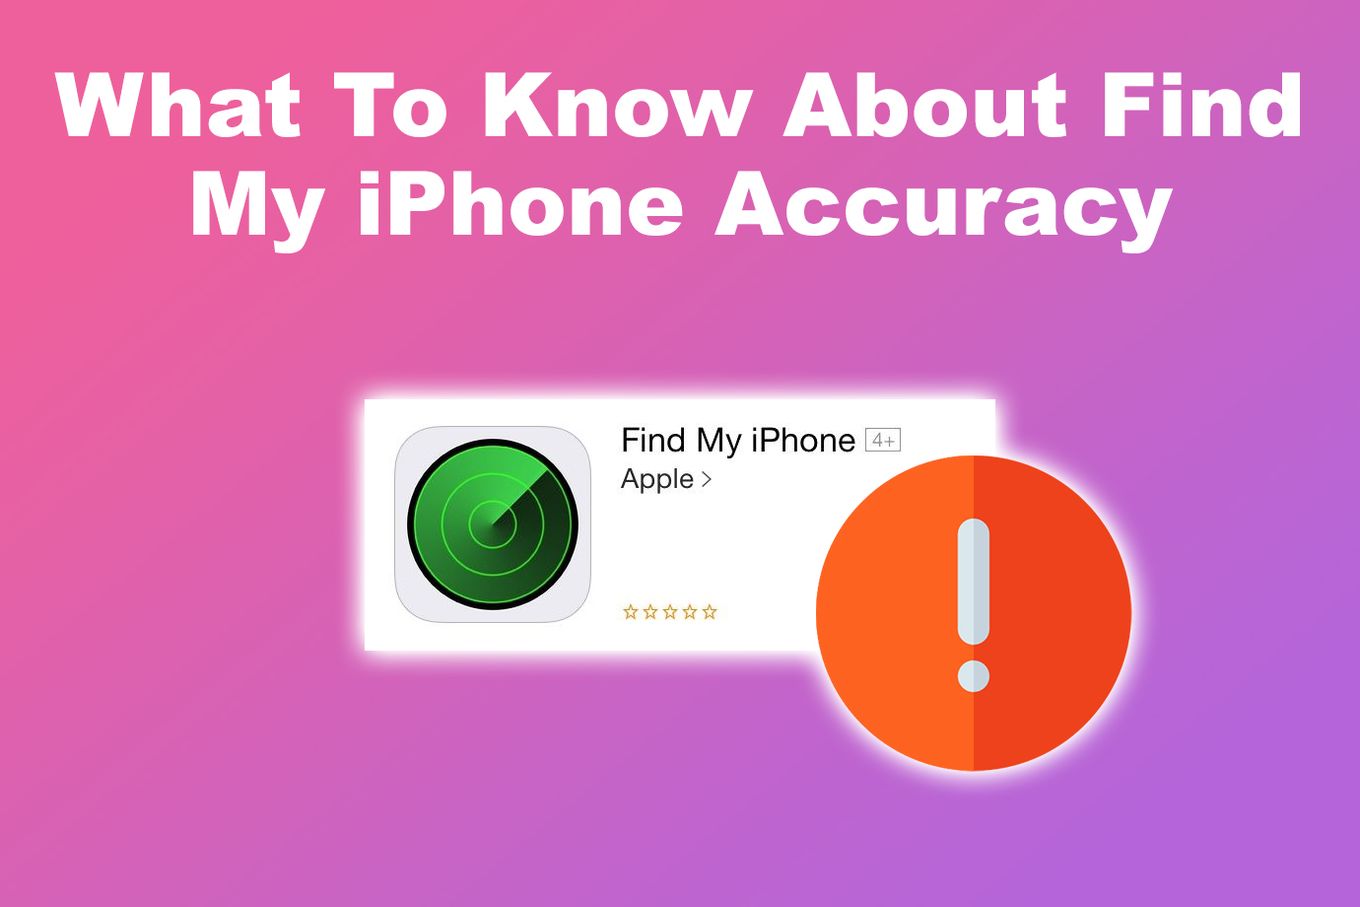 Is Find My iPhone 100% accurate?